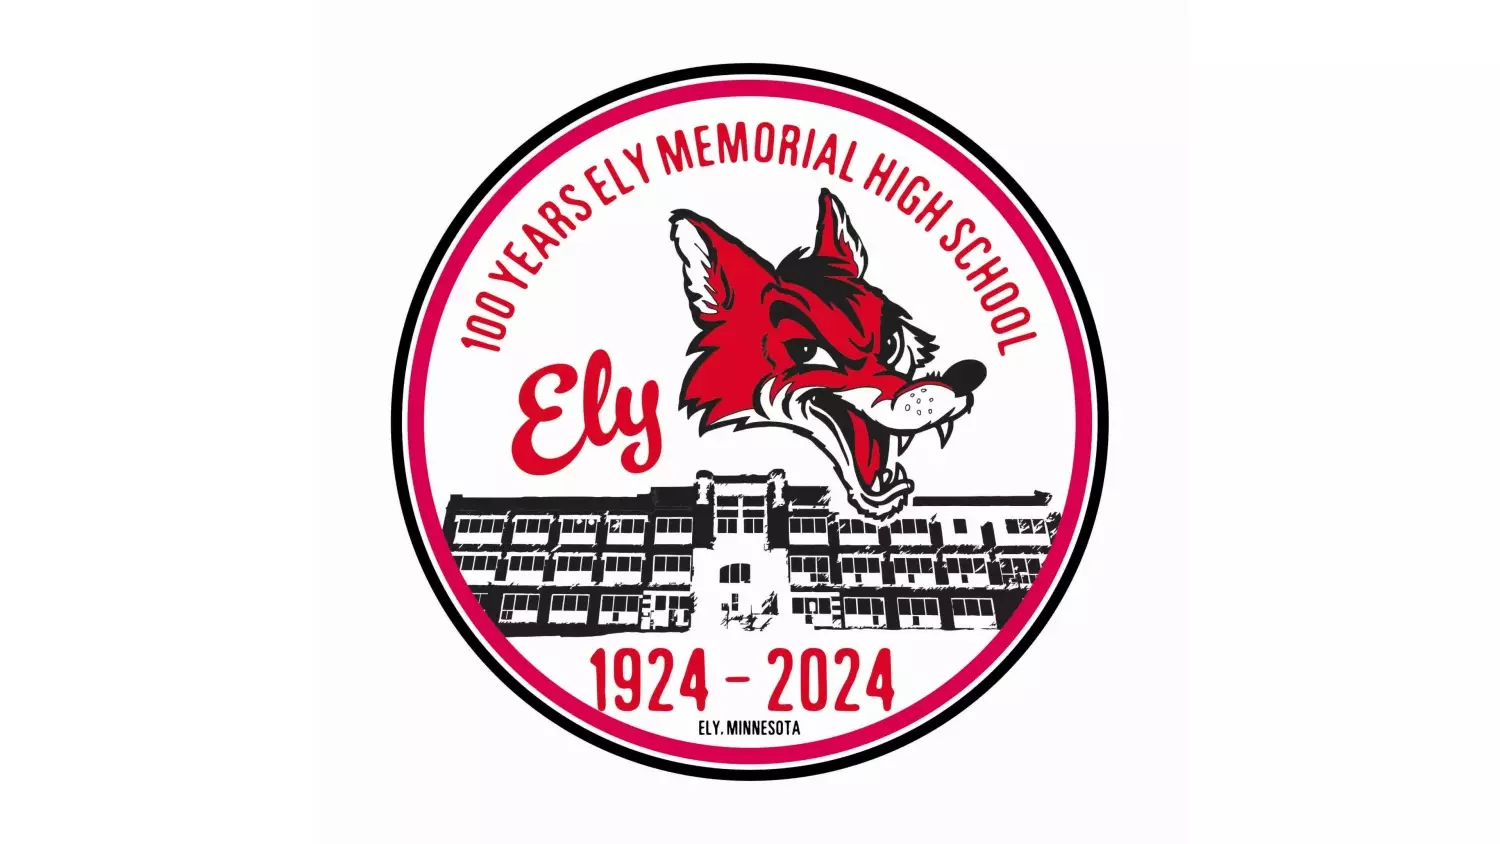 Drone video from the Ely All Class Reunion 2024 by Chris Ellerbroek